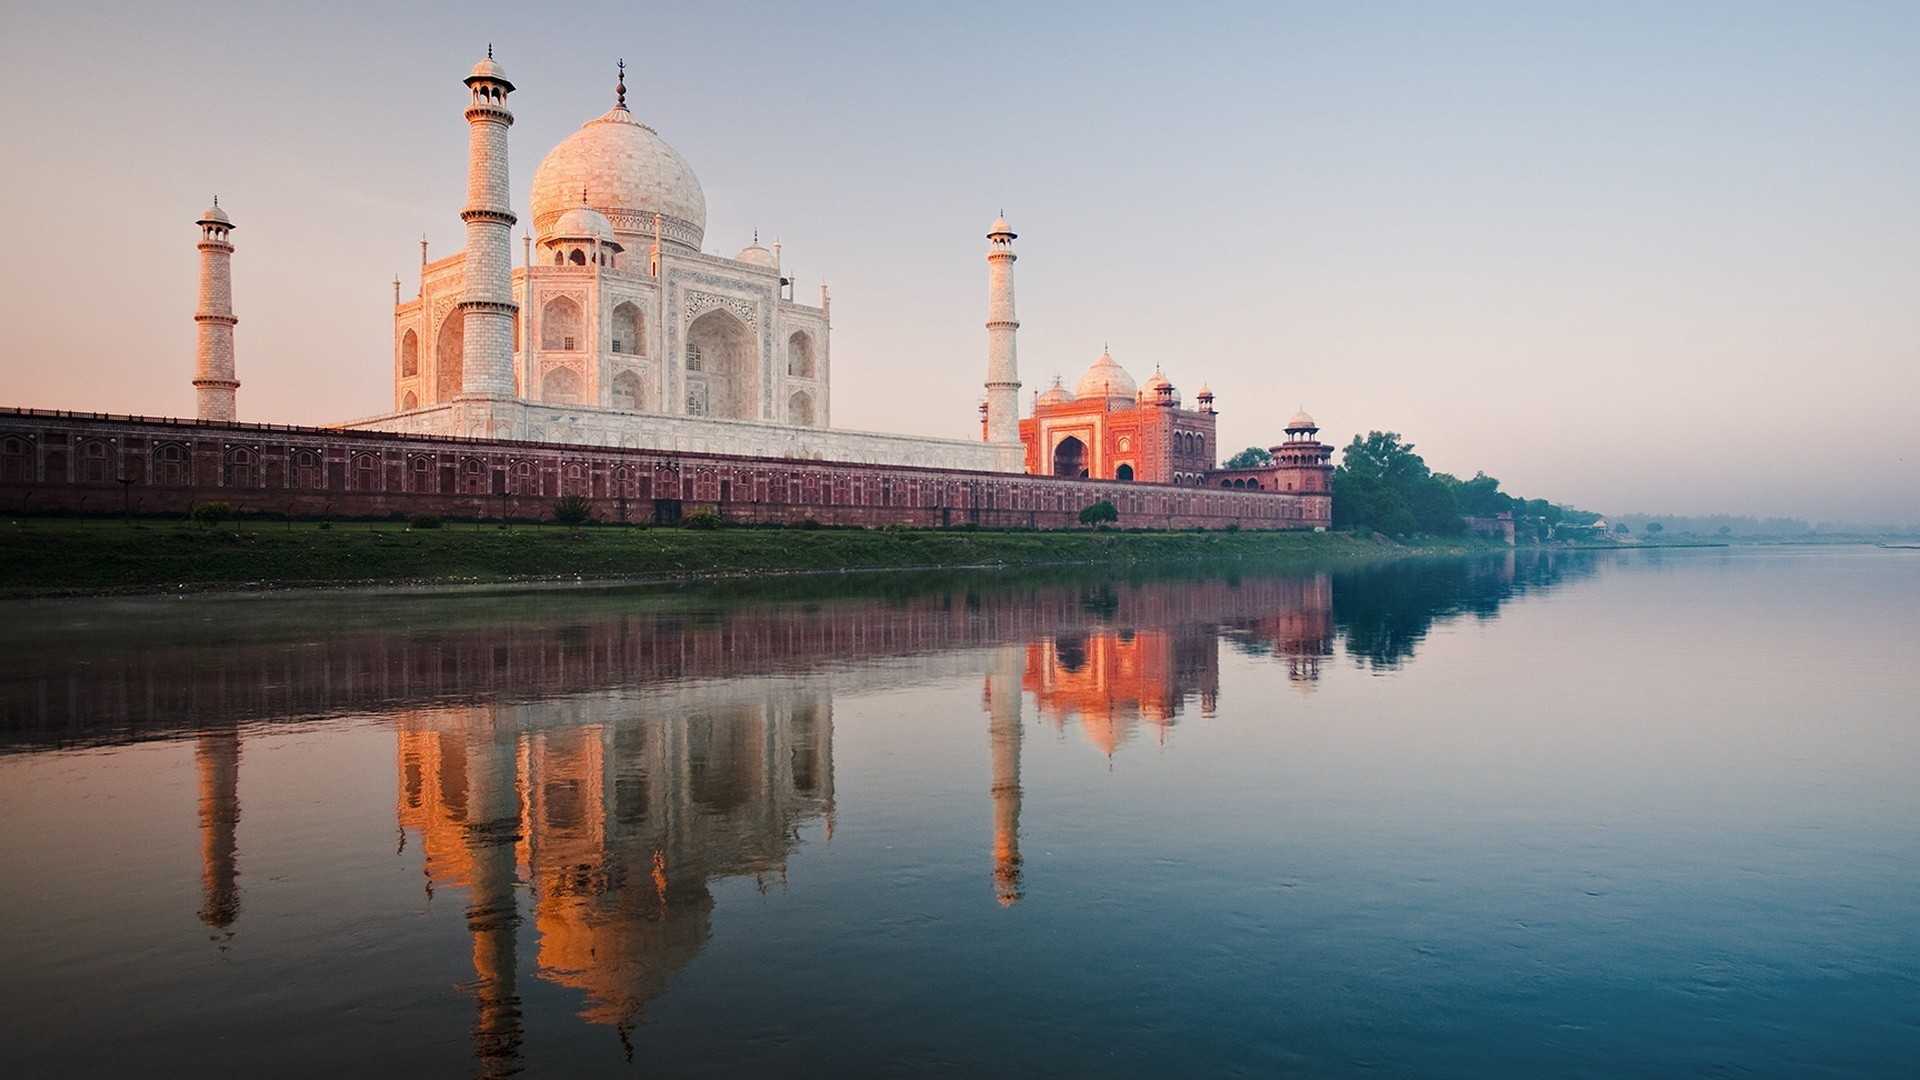 5-DAY Private Golden Triangle Tour Including Delhi,Agra & Jaipur